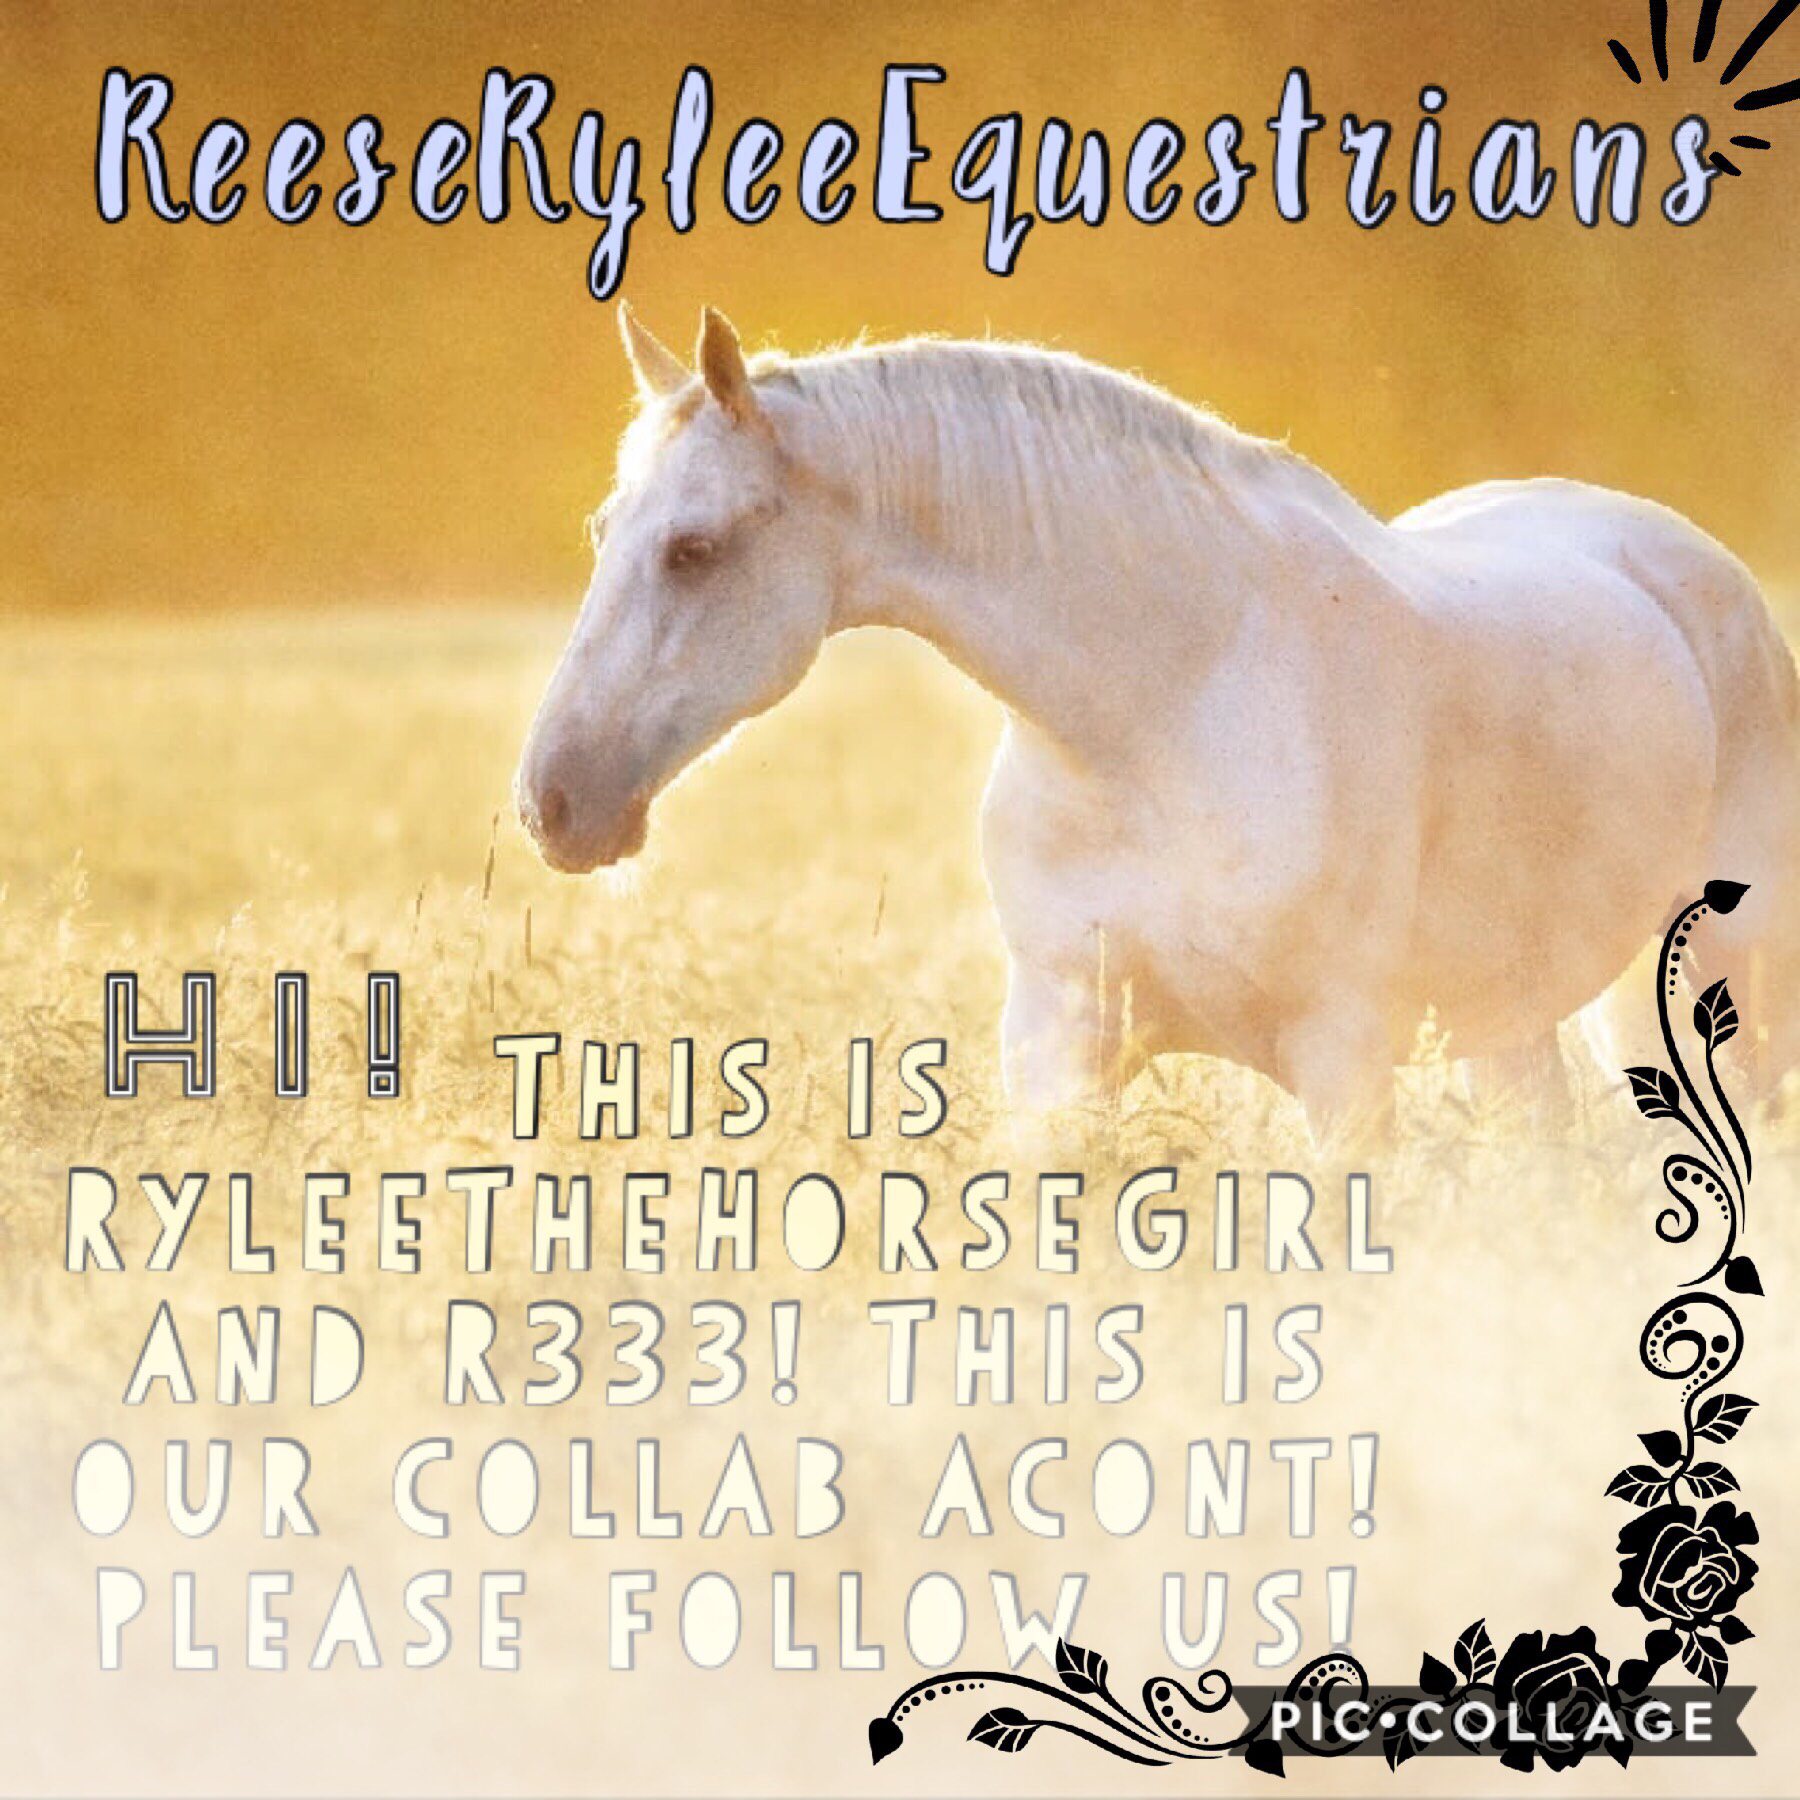 Welcome to our new collab account!! Check out RyleeTheHorseGirl and R333!!